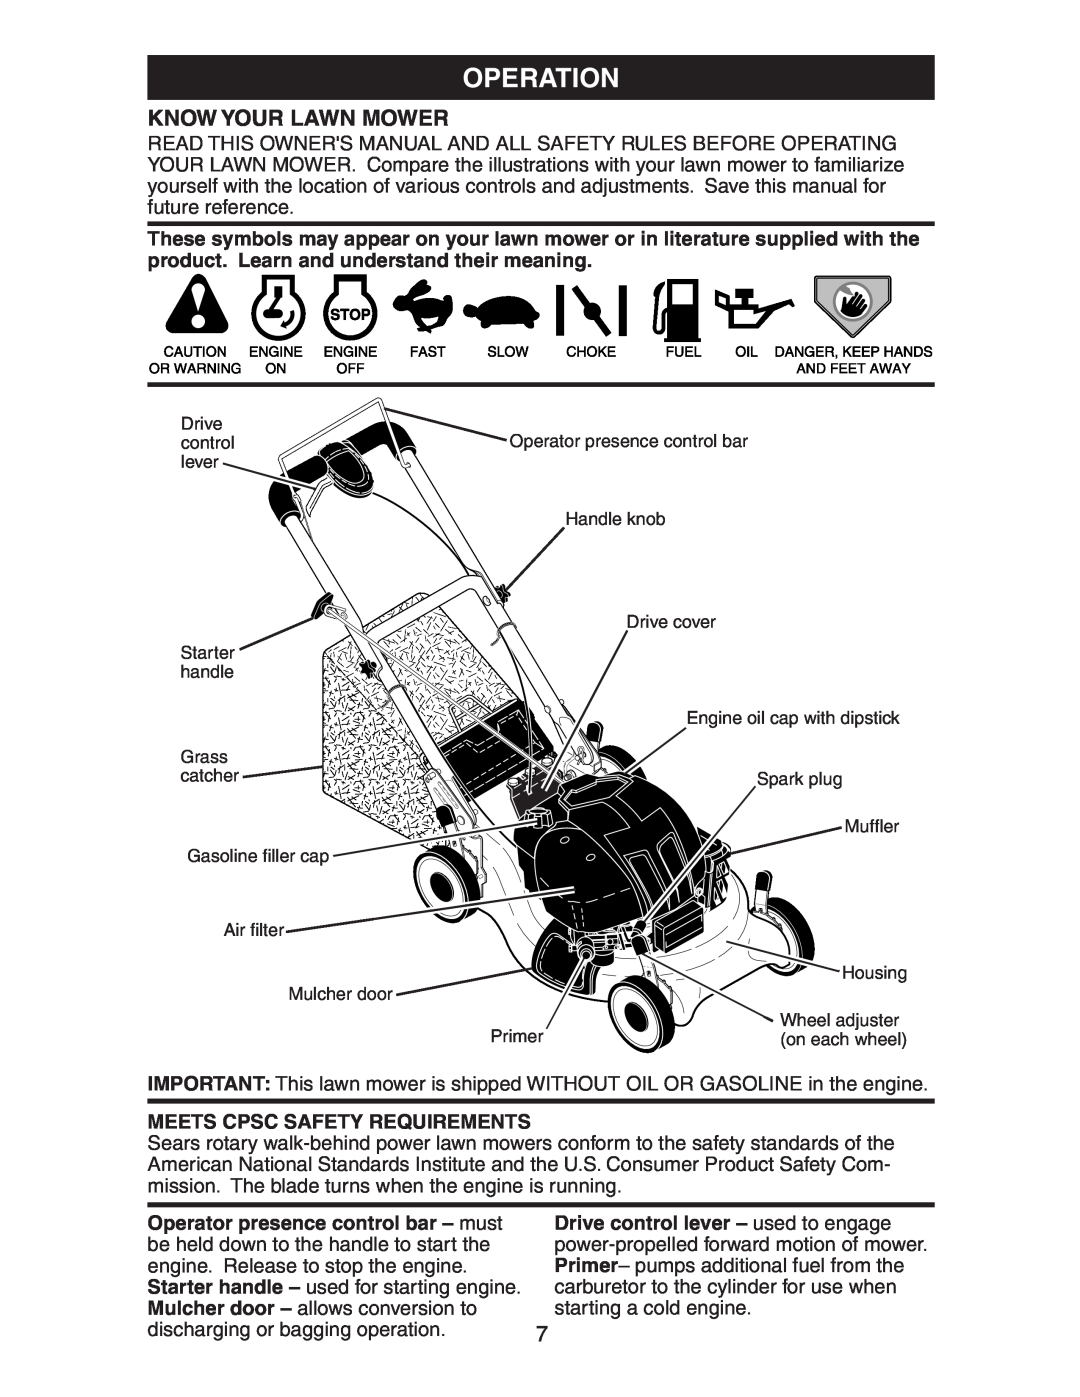 Husqvarna 917.37583 owner manual Operation, Know Your Lawn Mower 